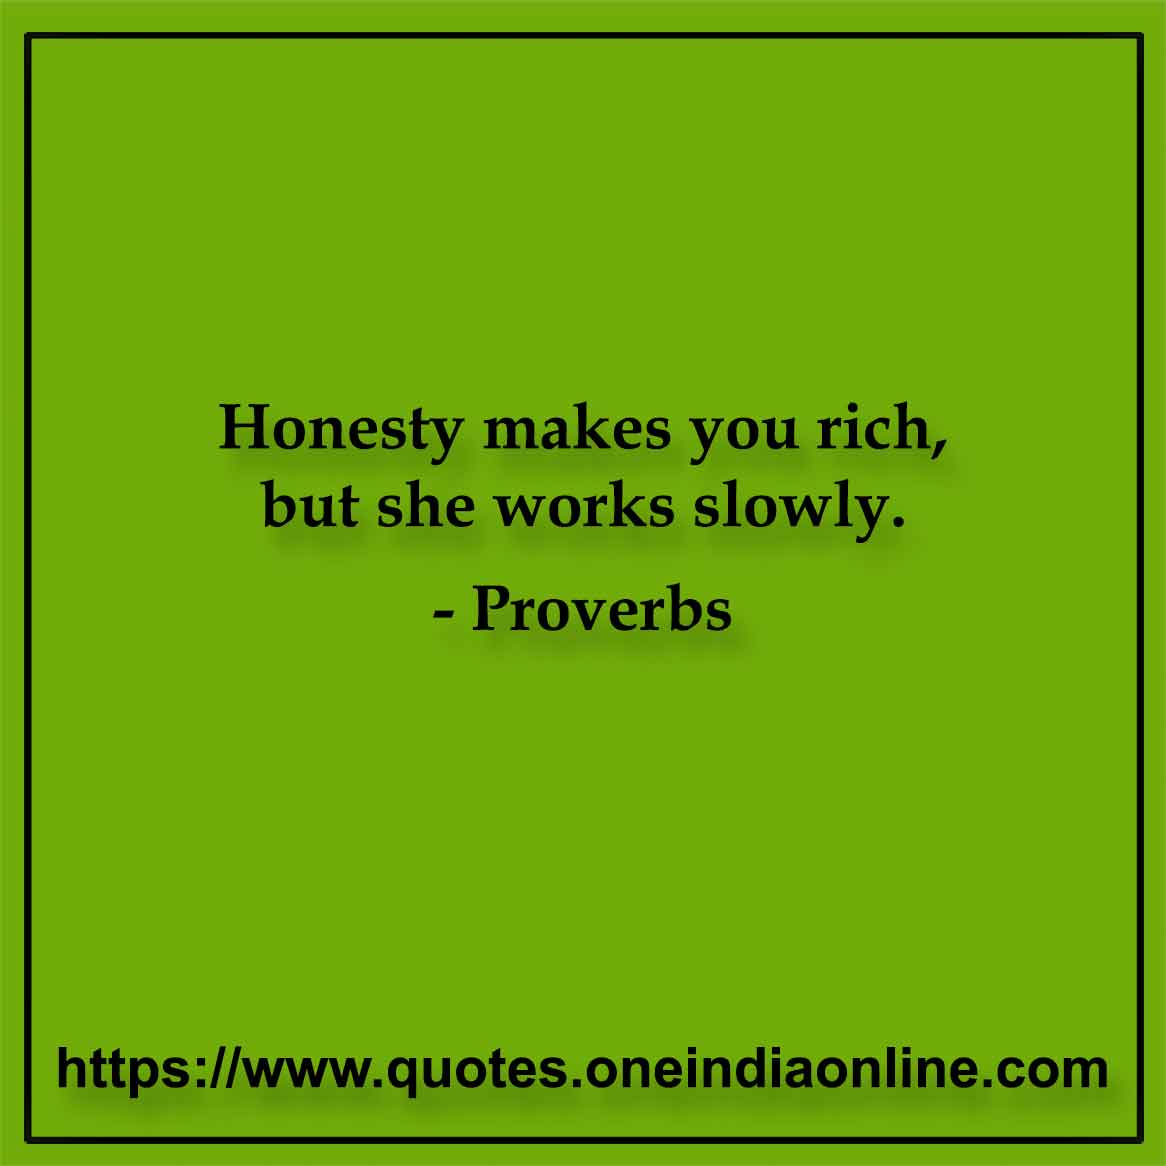 Honesty makes you rich, but she works slowly.

- German